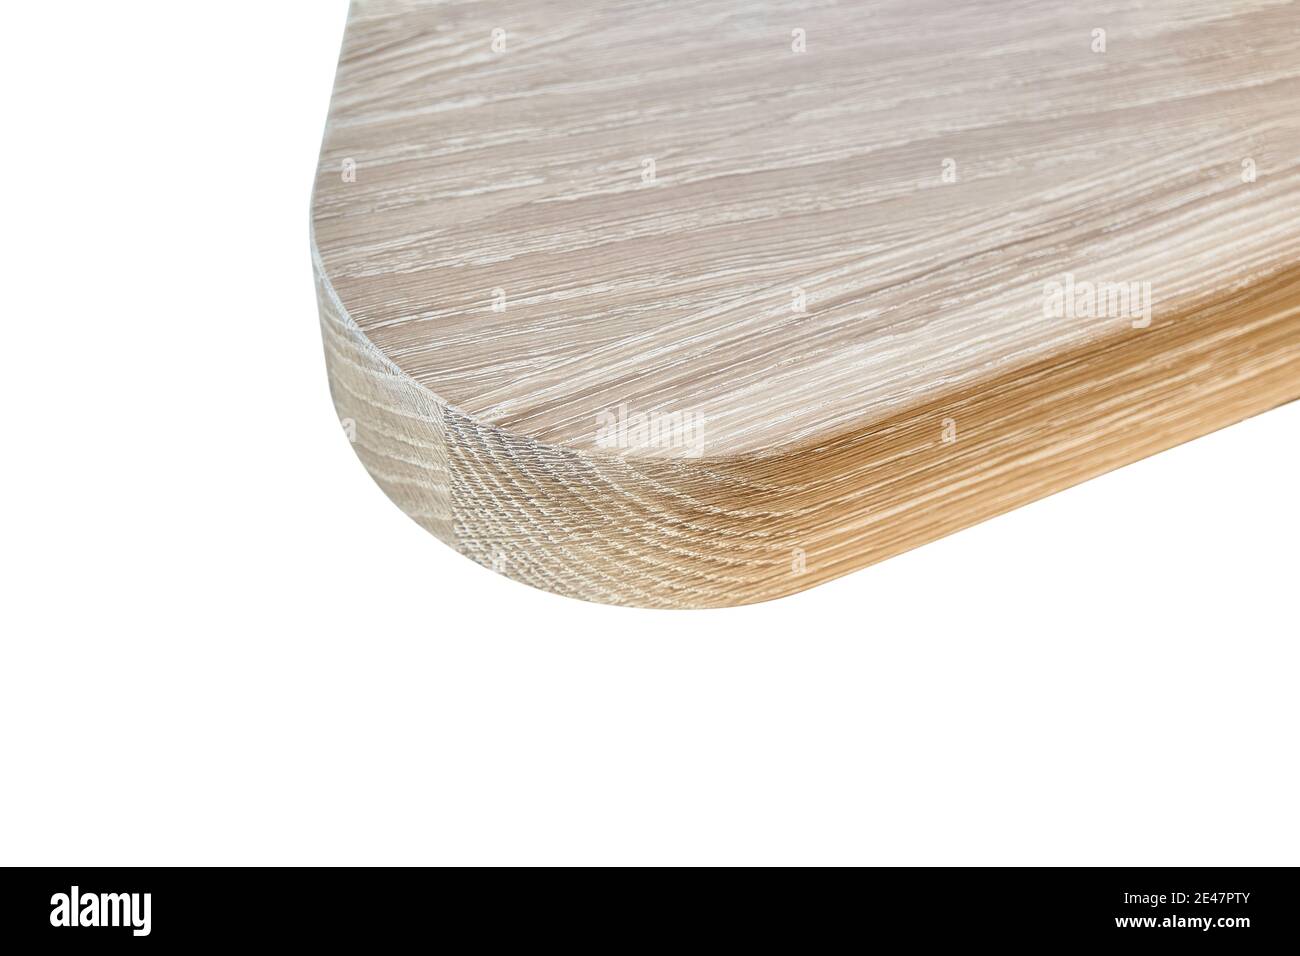 Elegant writing desk made with bleached solid oak timber against white background, extreme closeup Stock Photo